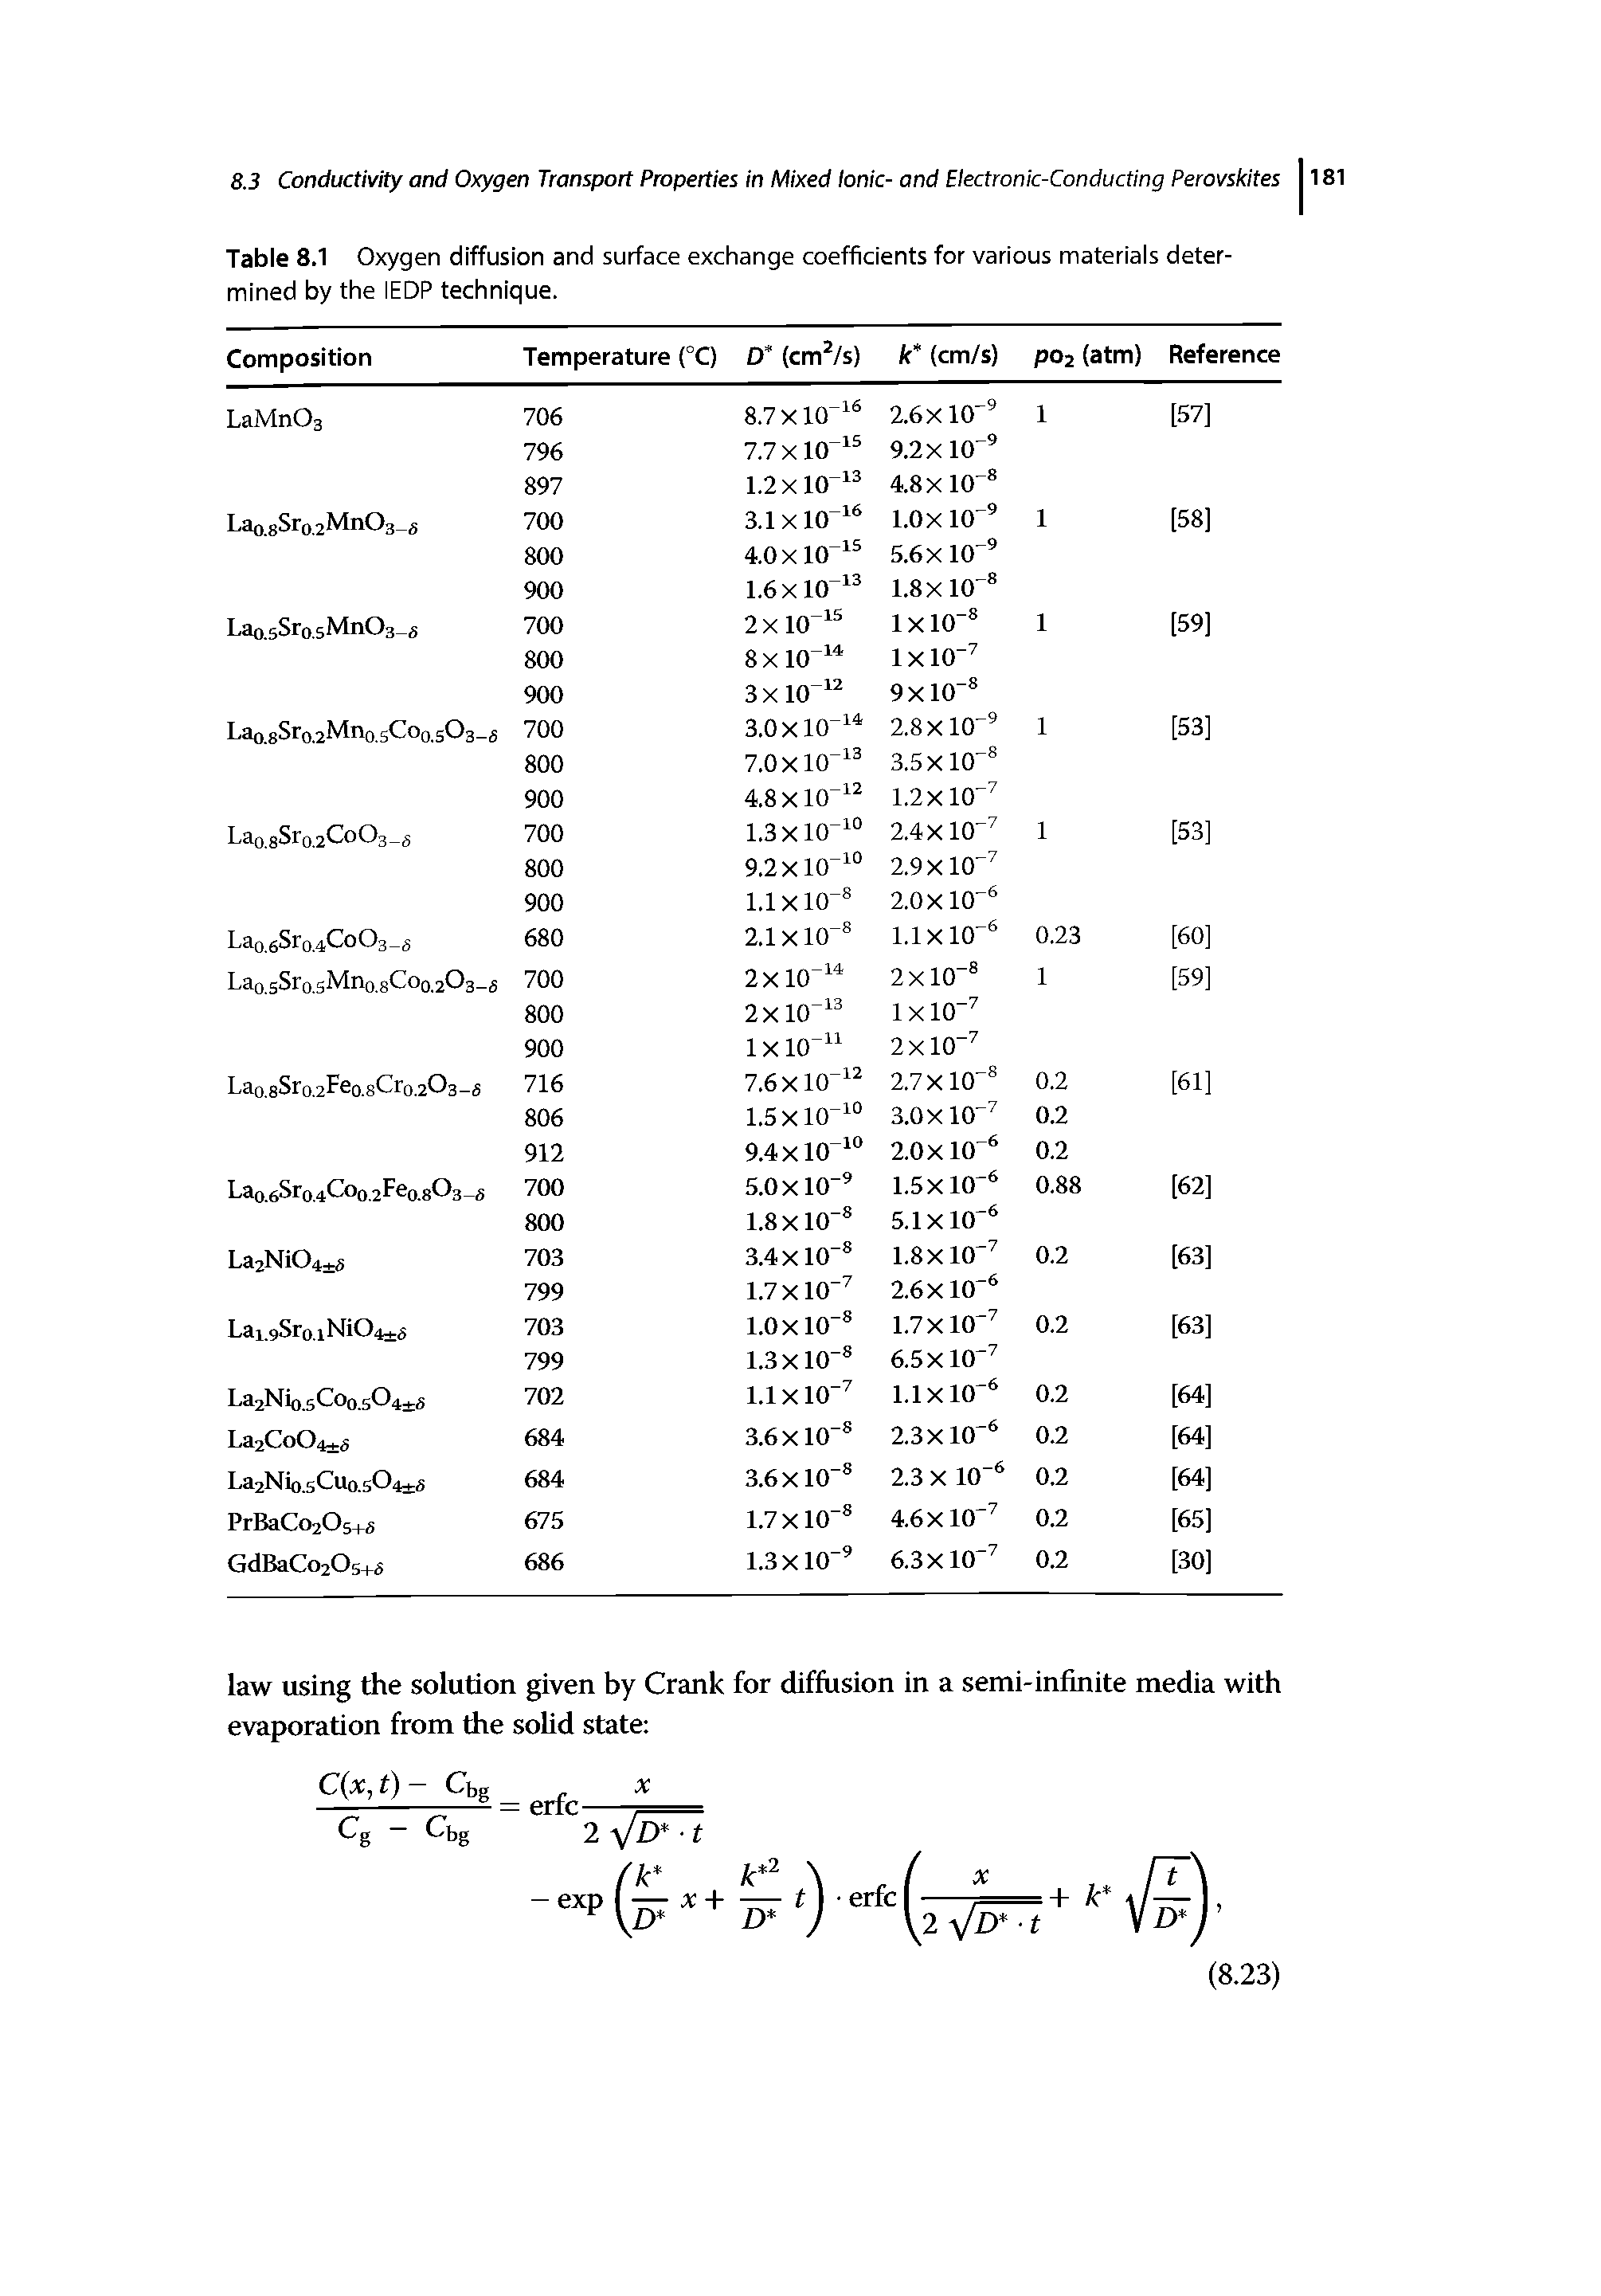 Table 8.1 Oxygen diffusion and surface exchange coefficients for various materiais determined by the lEDP technique.